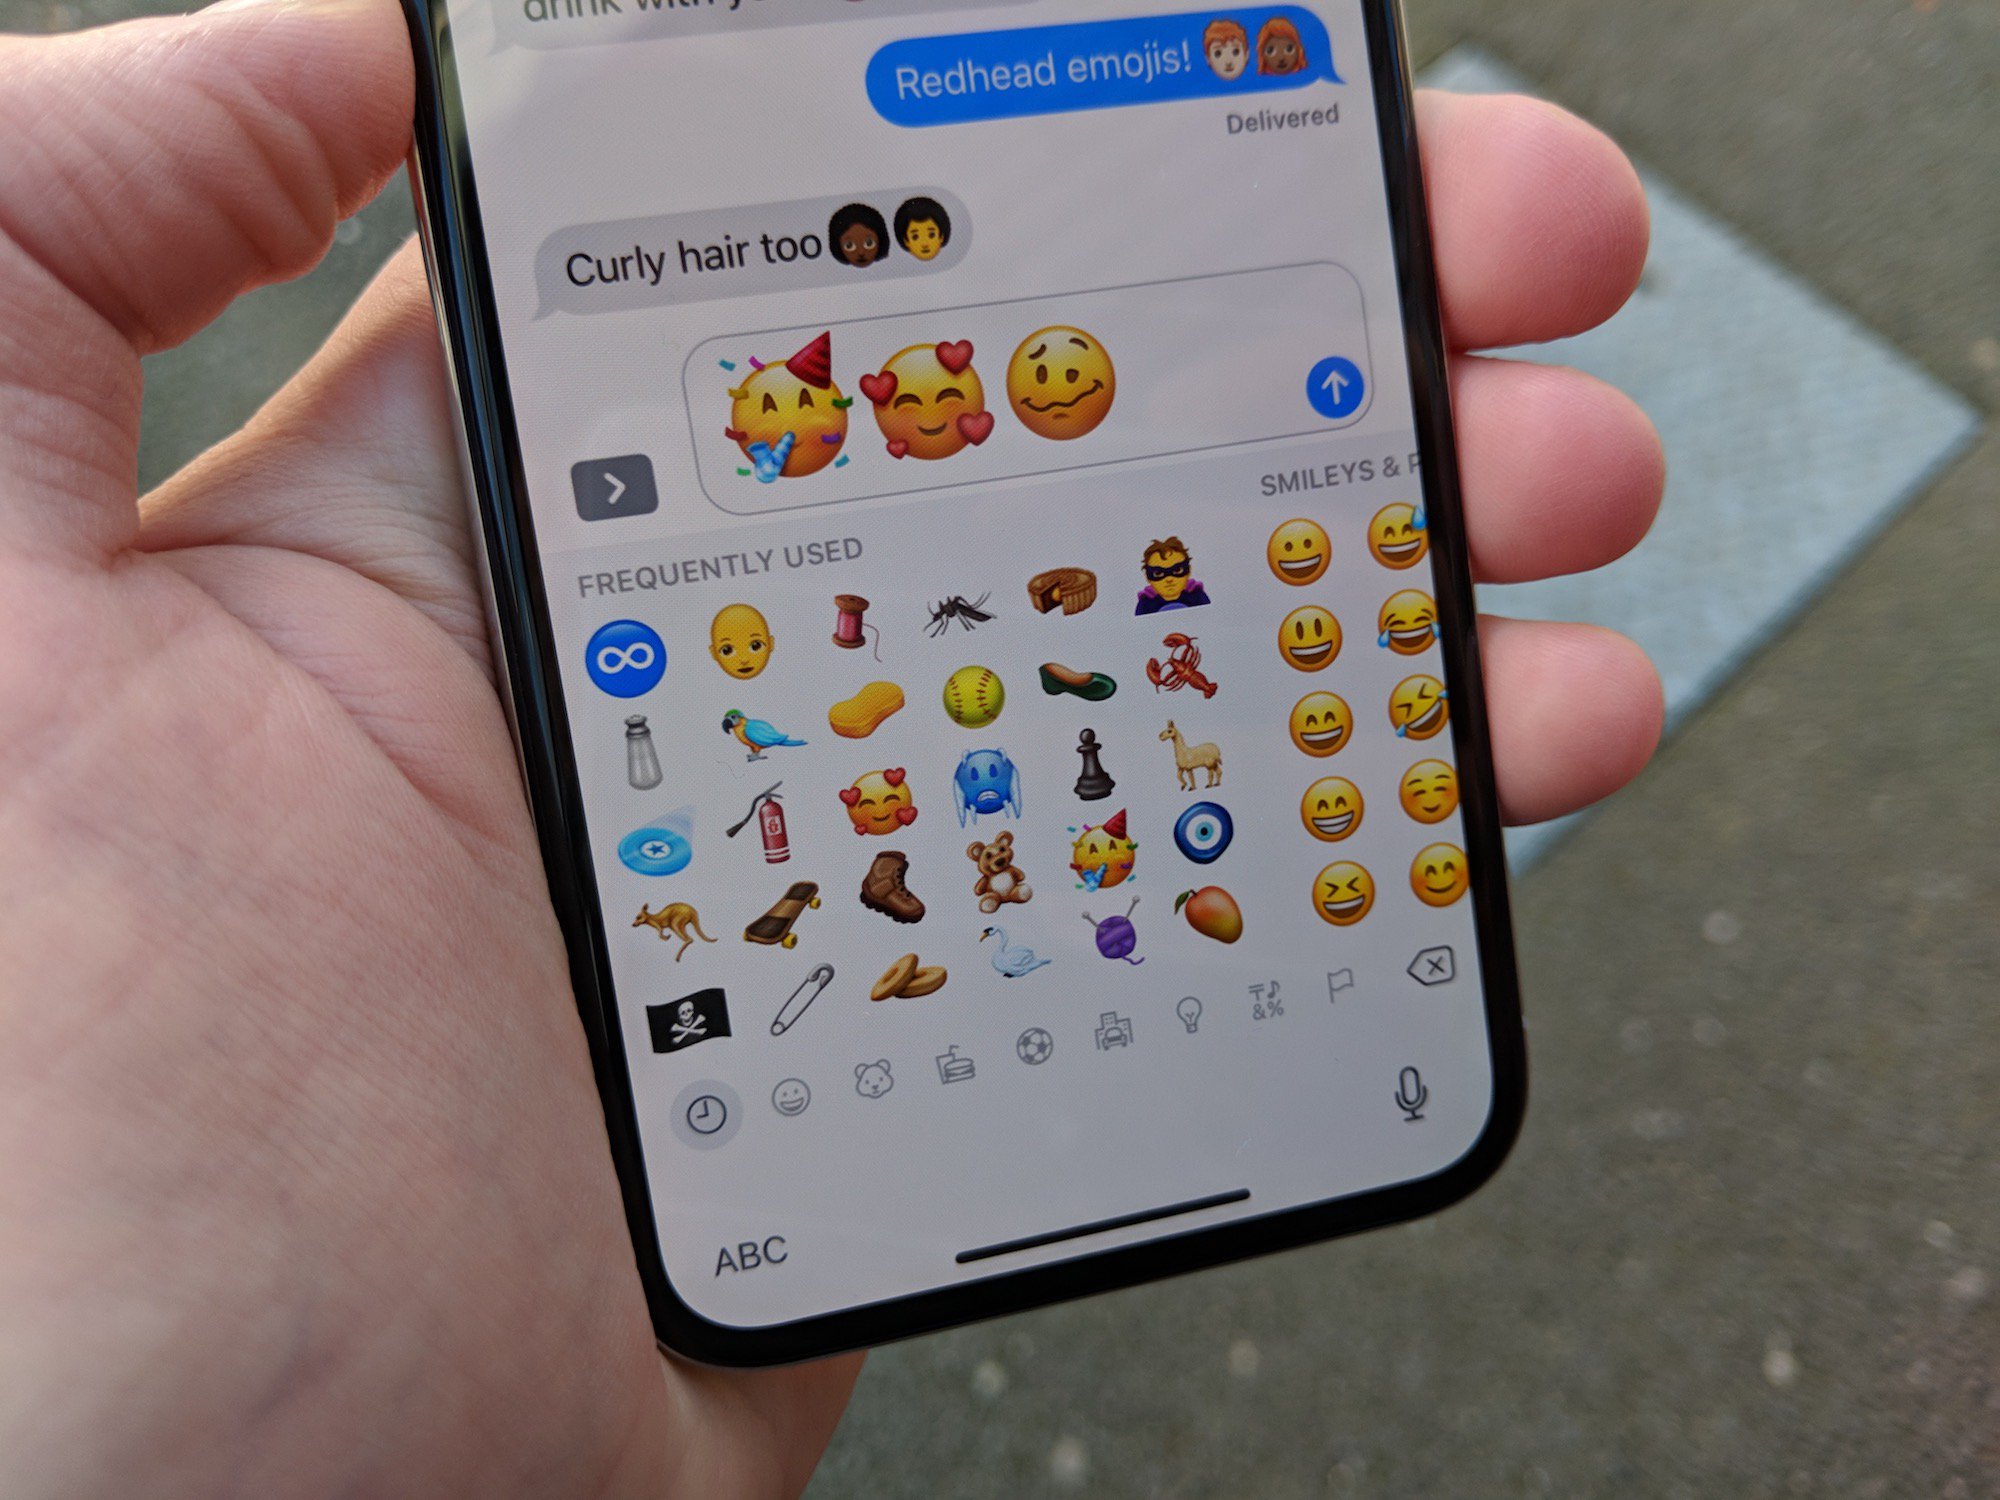 iPhone emoji sets added in iOS 12.1 include more than 70+ new characters approved in Unicode 11.0